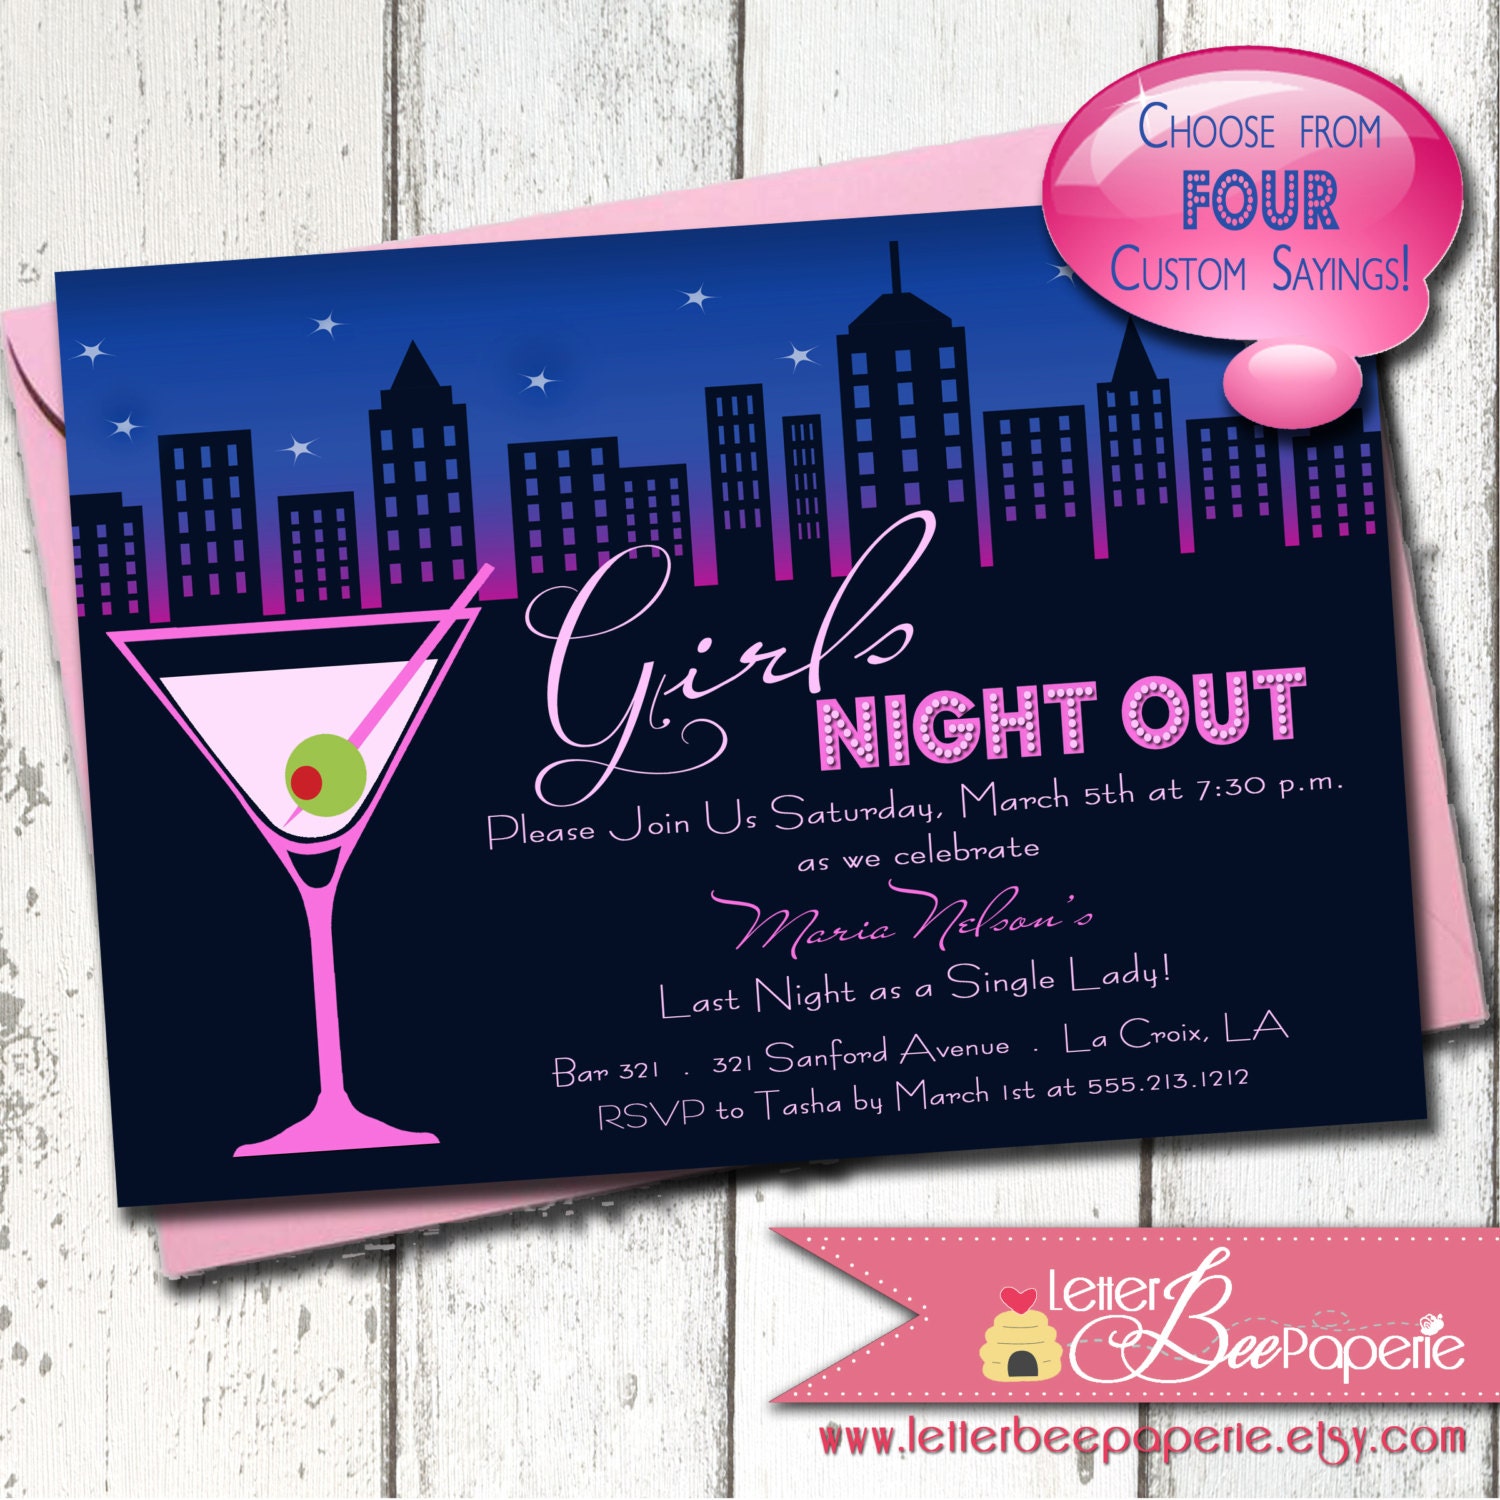 Bachelorette Party Invitation Girls Night Out Ladies Night